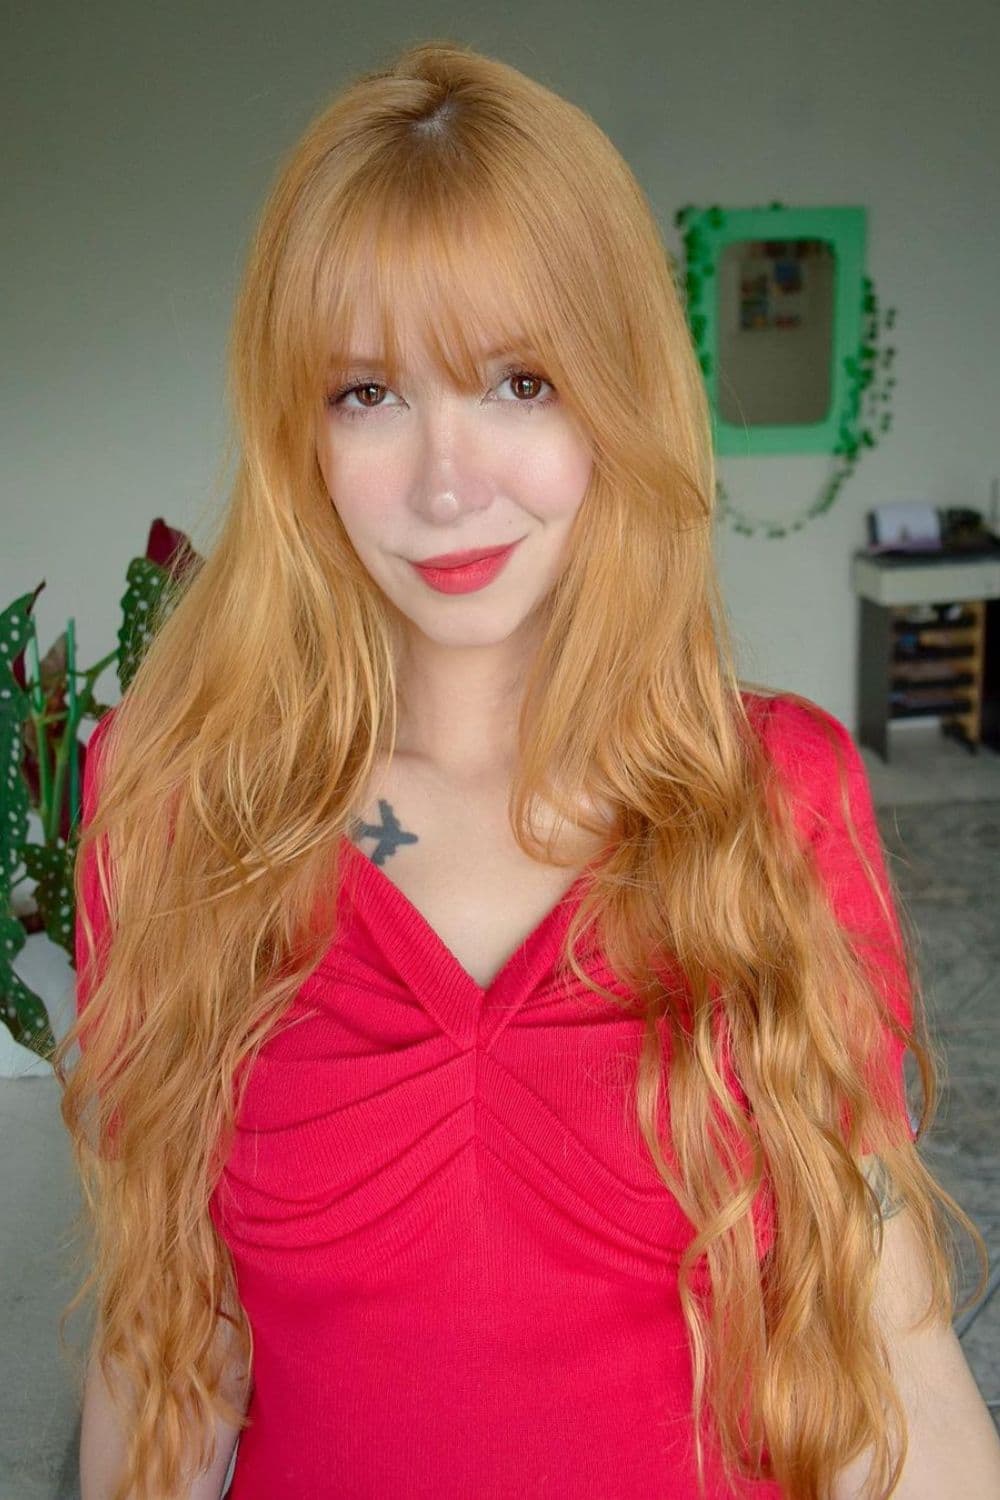 A woman with long strawberry blonde hair with wispy bangs.